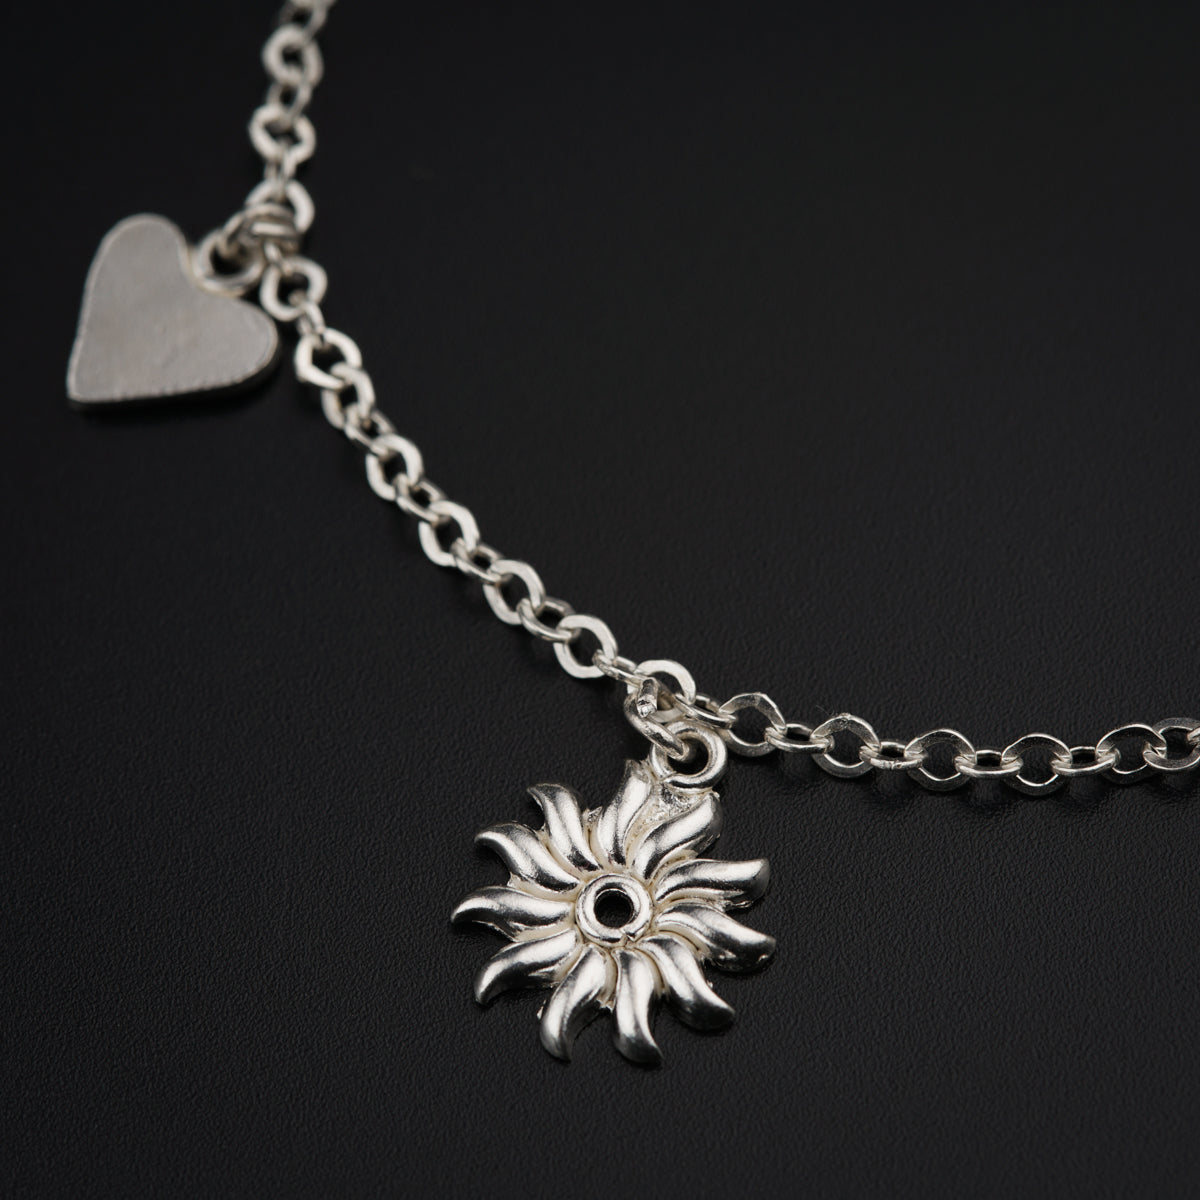 a silver bracelet with a heart and a flower charm